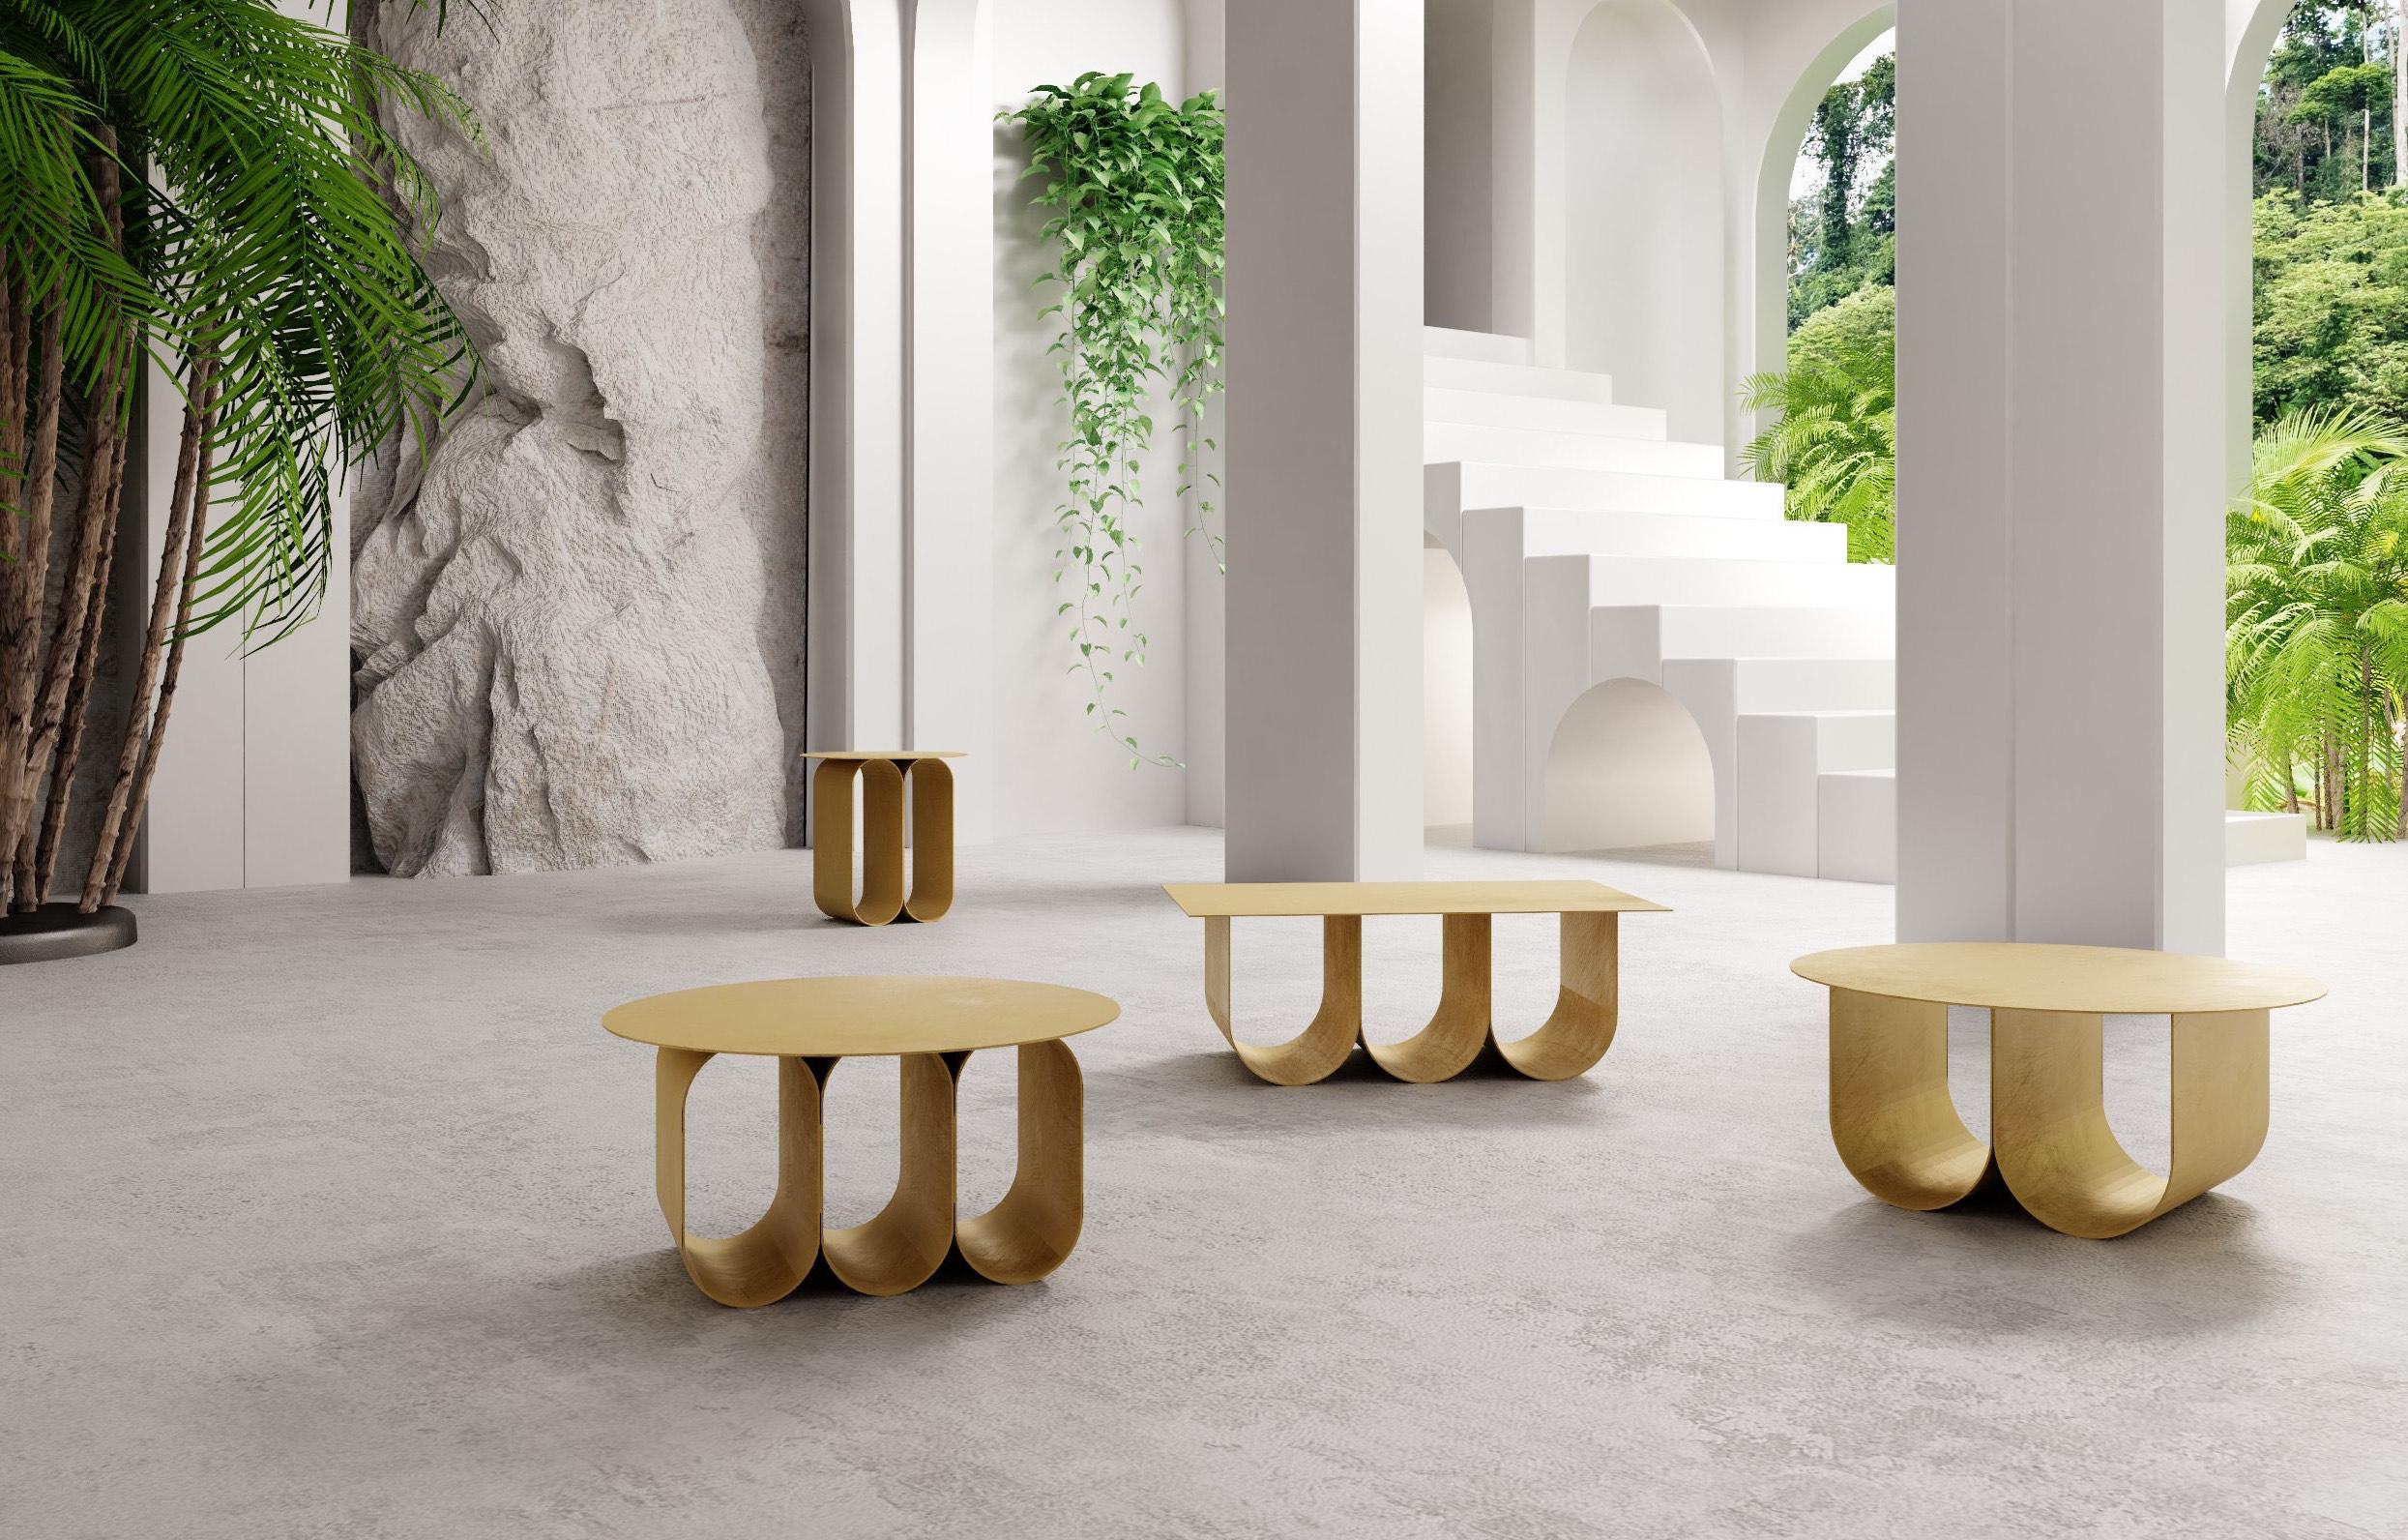 Gold Rounded 3 Arches Arcade Side and Coffee Table by Kasadamo
Dimensions: D 100 x H 40cm
Materials: stainless steel
Also Available: Other color and sizes available


Kasadamo is about uniqueness, visions and exclusivity, a brand that was designed